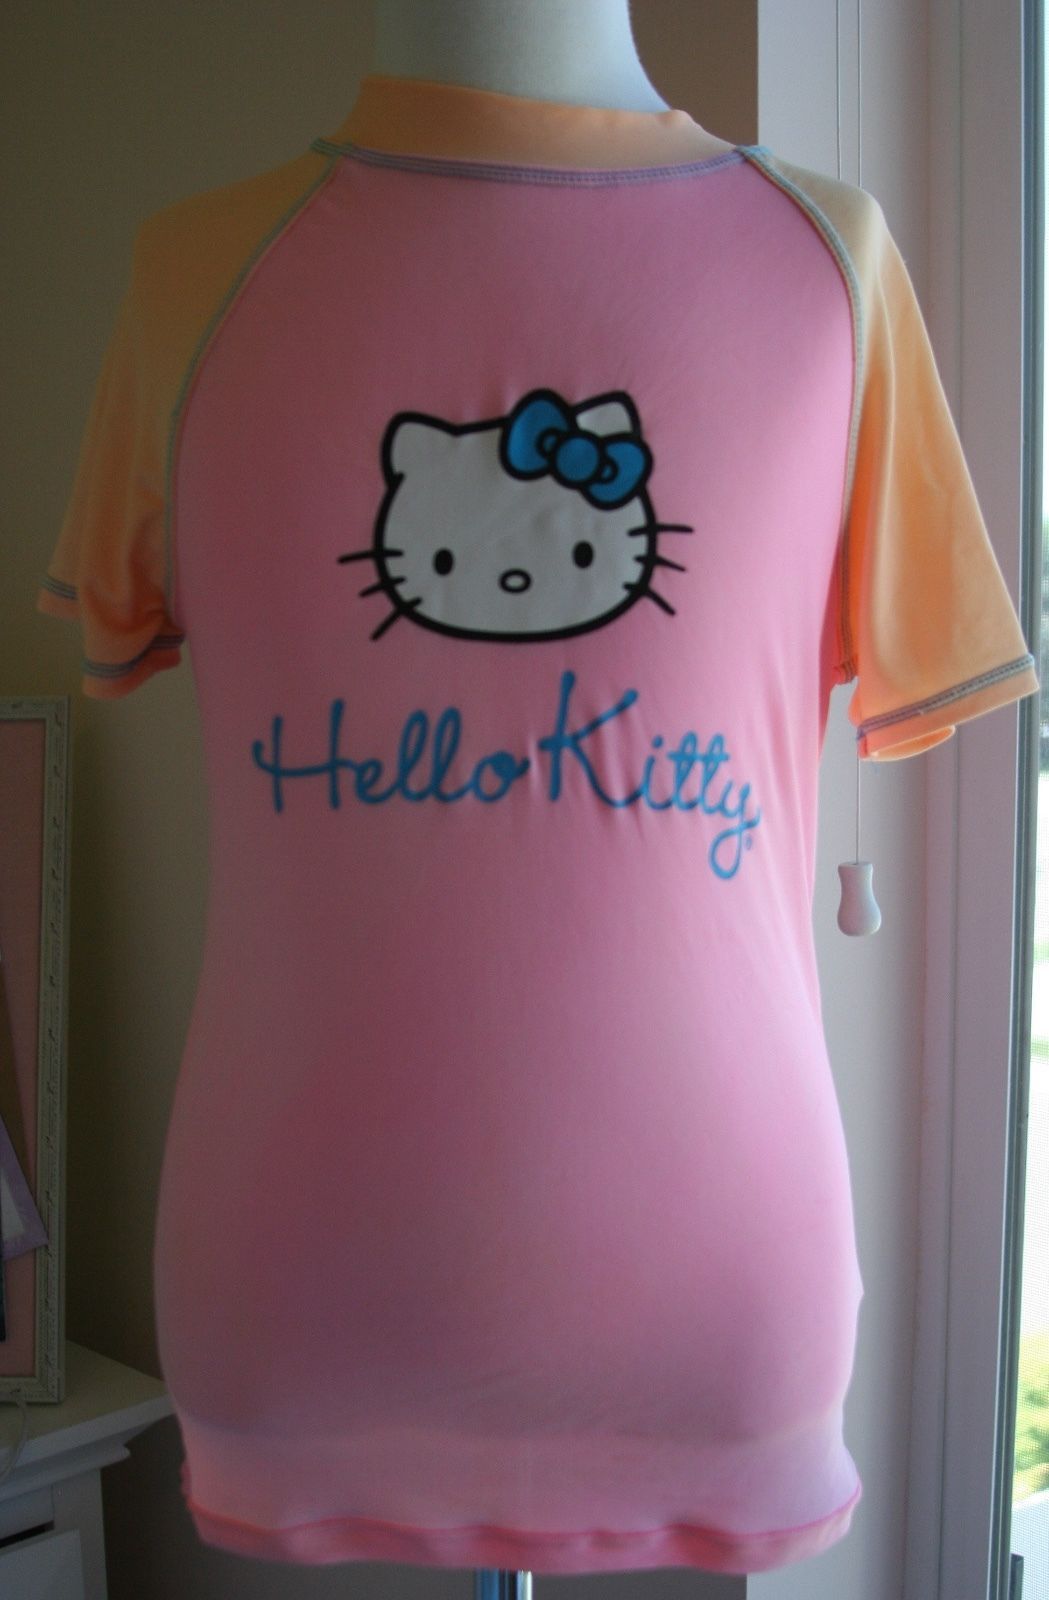 HELLO KITTY SURF SHIRT Girls Size 6 swimsuit and 50 similar items